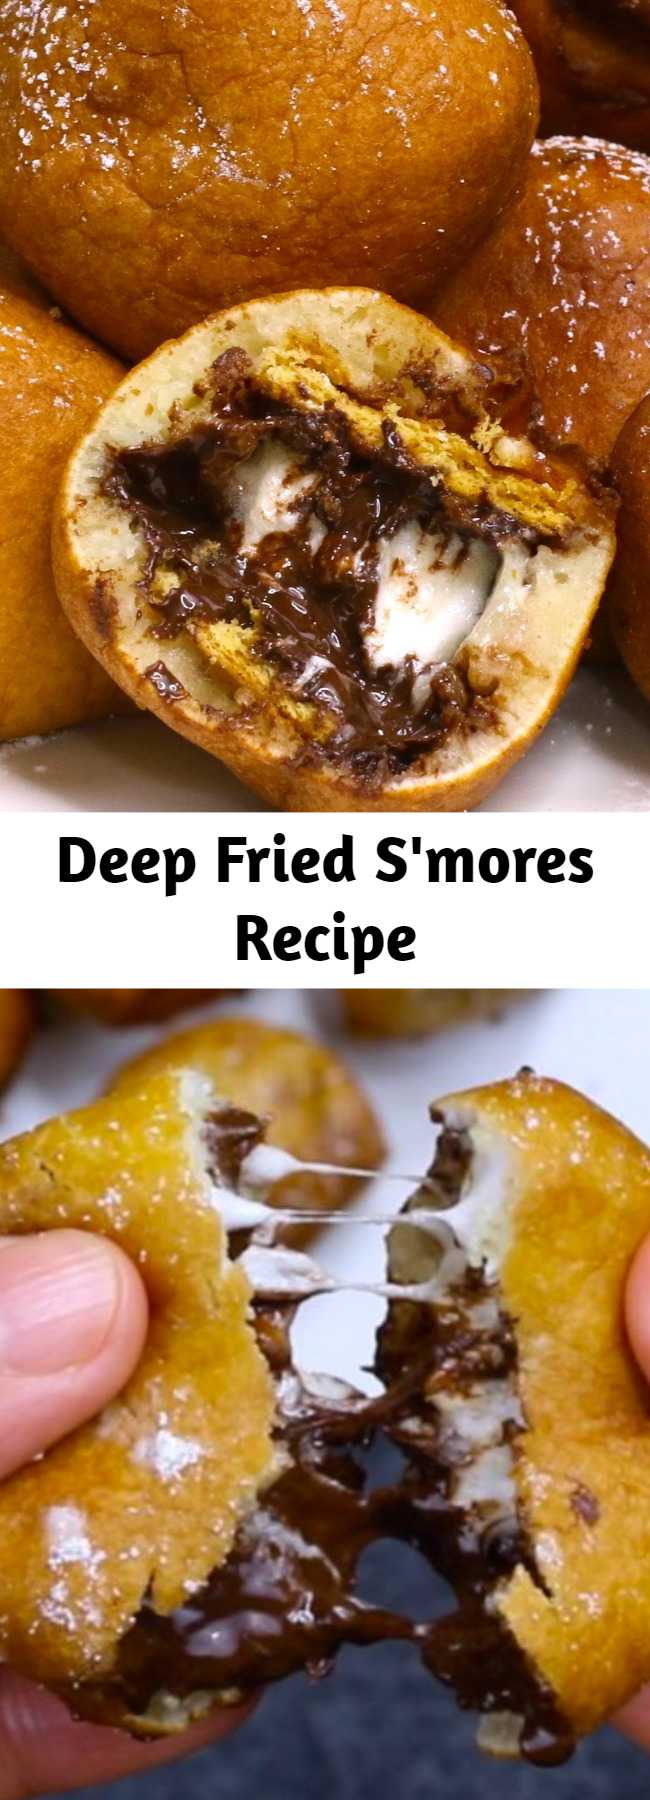 Seriously one of the most delicious dessert! Smores dipped in homemade batter, and fried to a fluffy, golden crispy ball with warm and melty chocolate chips and marshmallow inside. Quick and easy recipe. Perfect for party desserts. No bake, vegetarian.